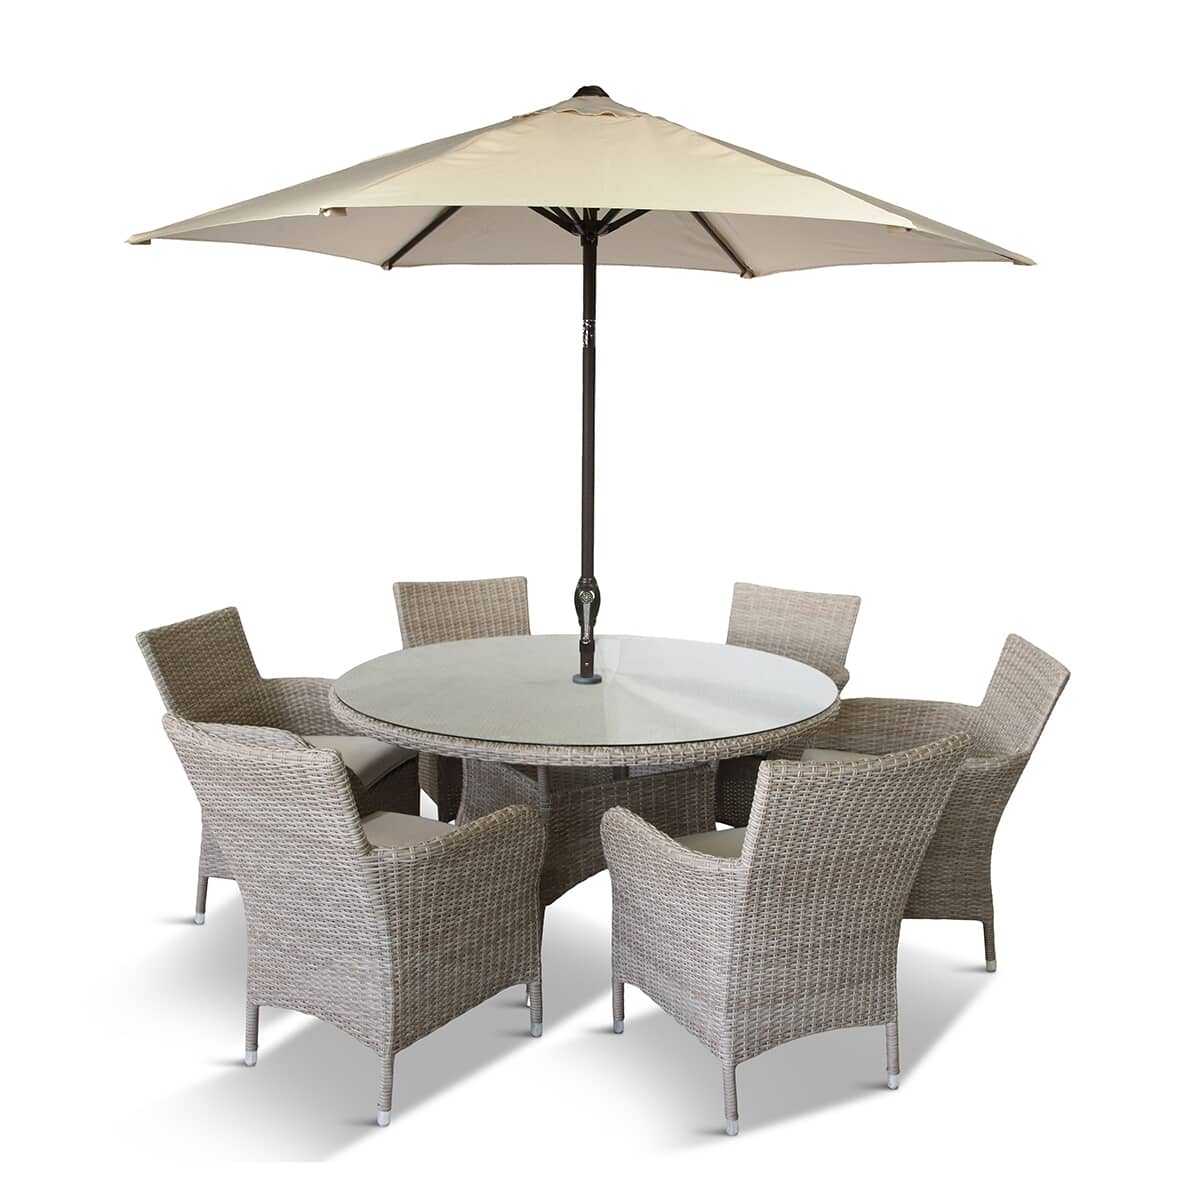 LG Outdoor Monaco Sand 6 Seat Dining Set with Weave Lazy Susan and Parasol 2023